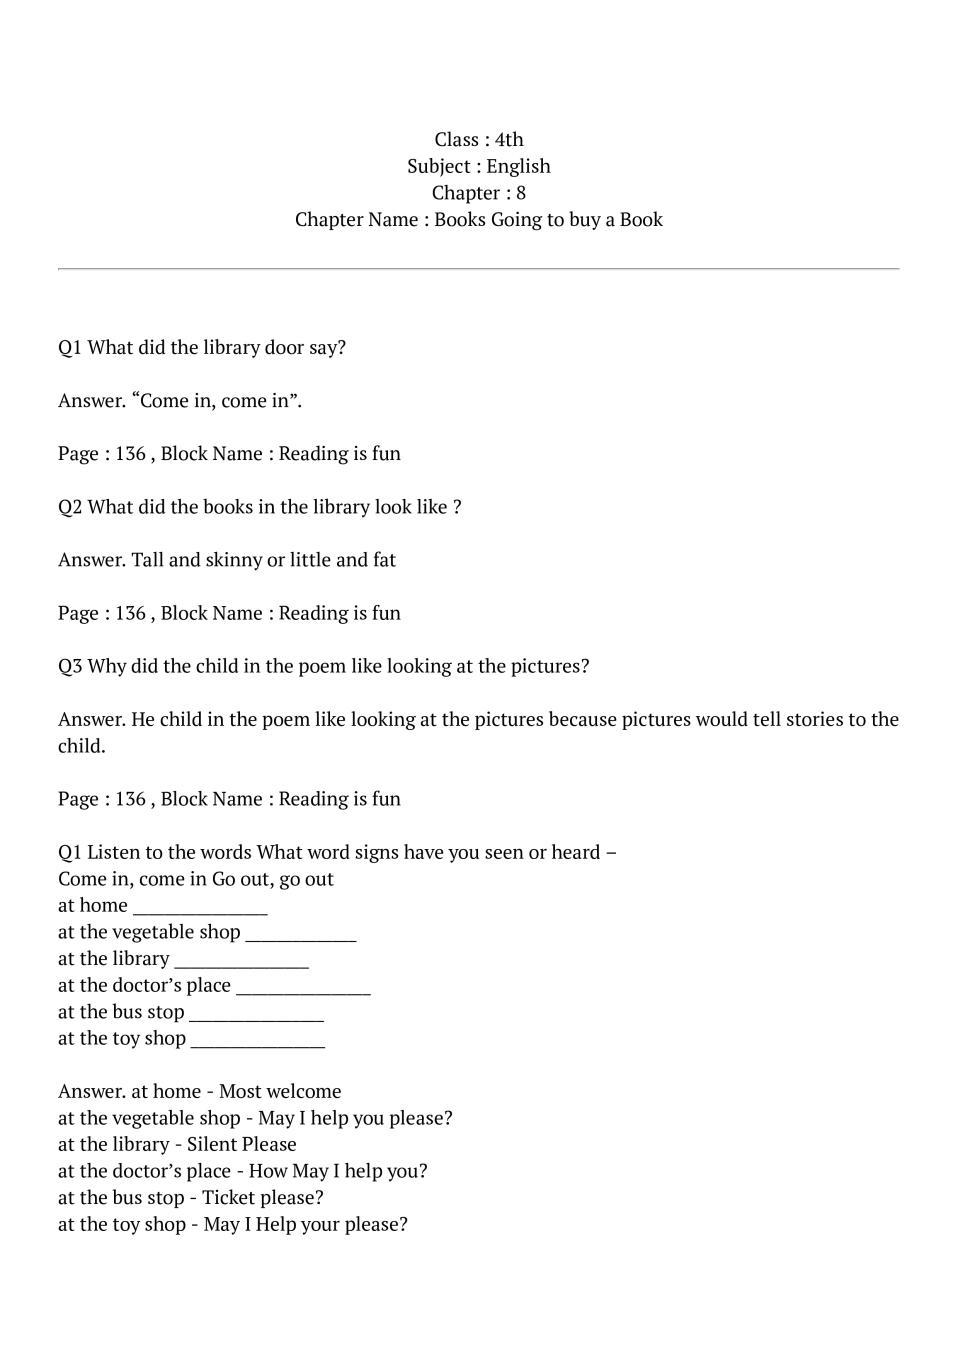 Ncert Solutions For Class 4 English Marigold Unit 8 Books Going To Buy A Book